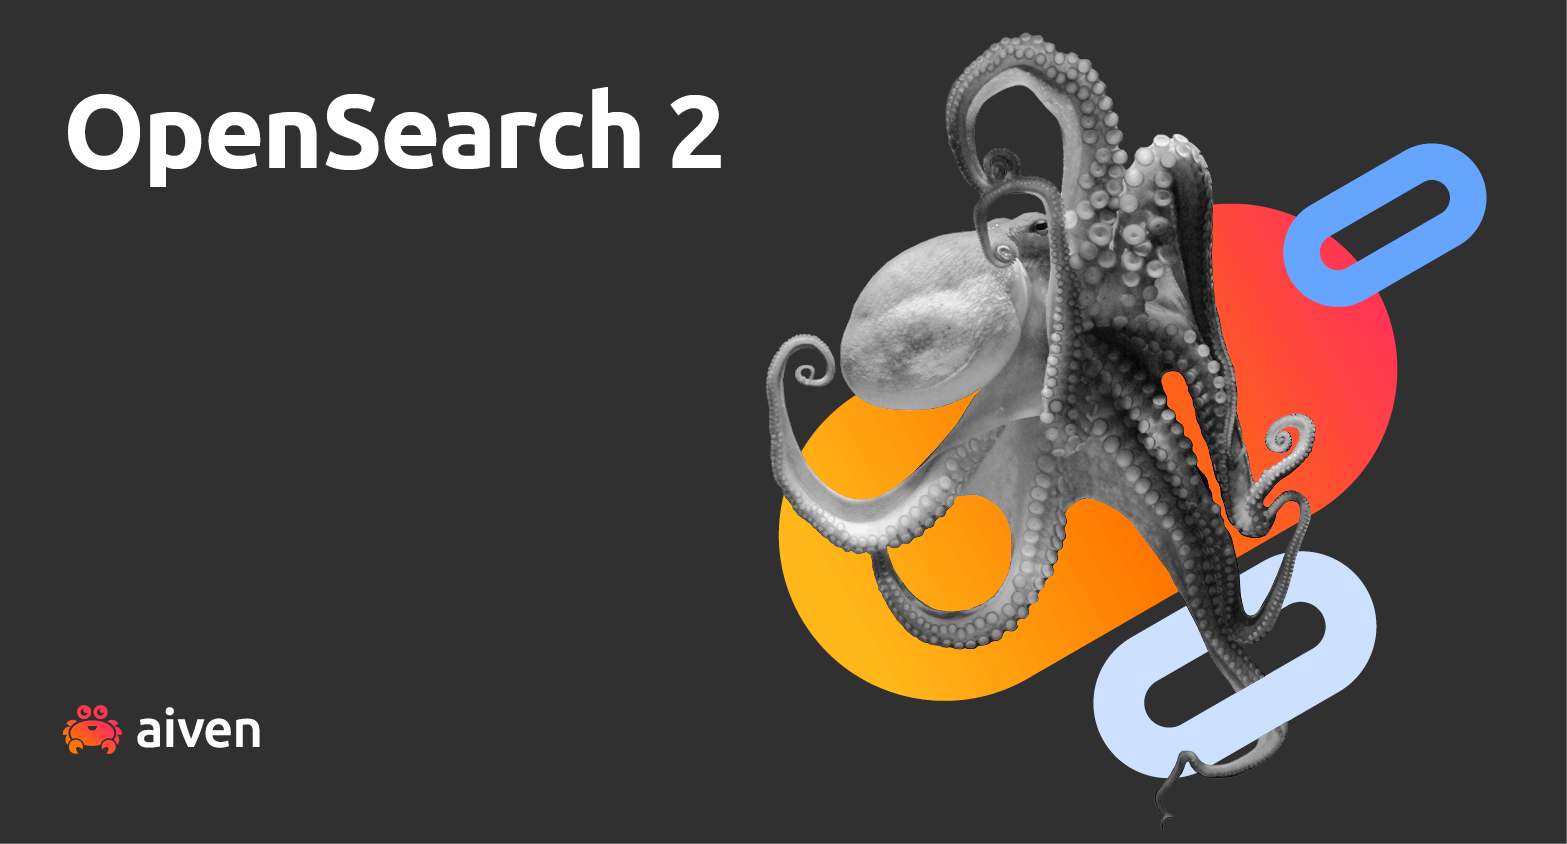 OpenSearch 2 is here